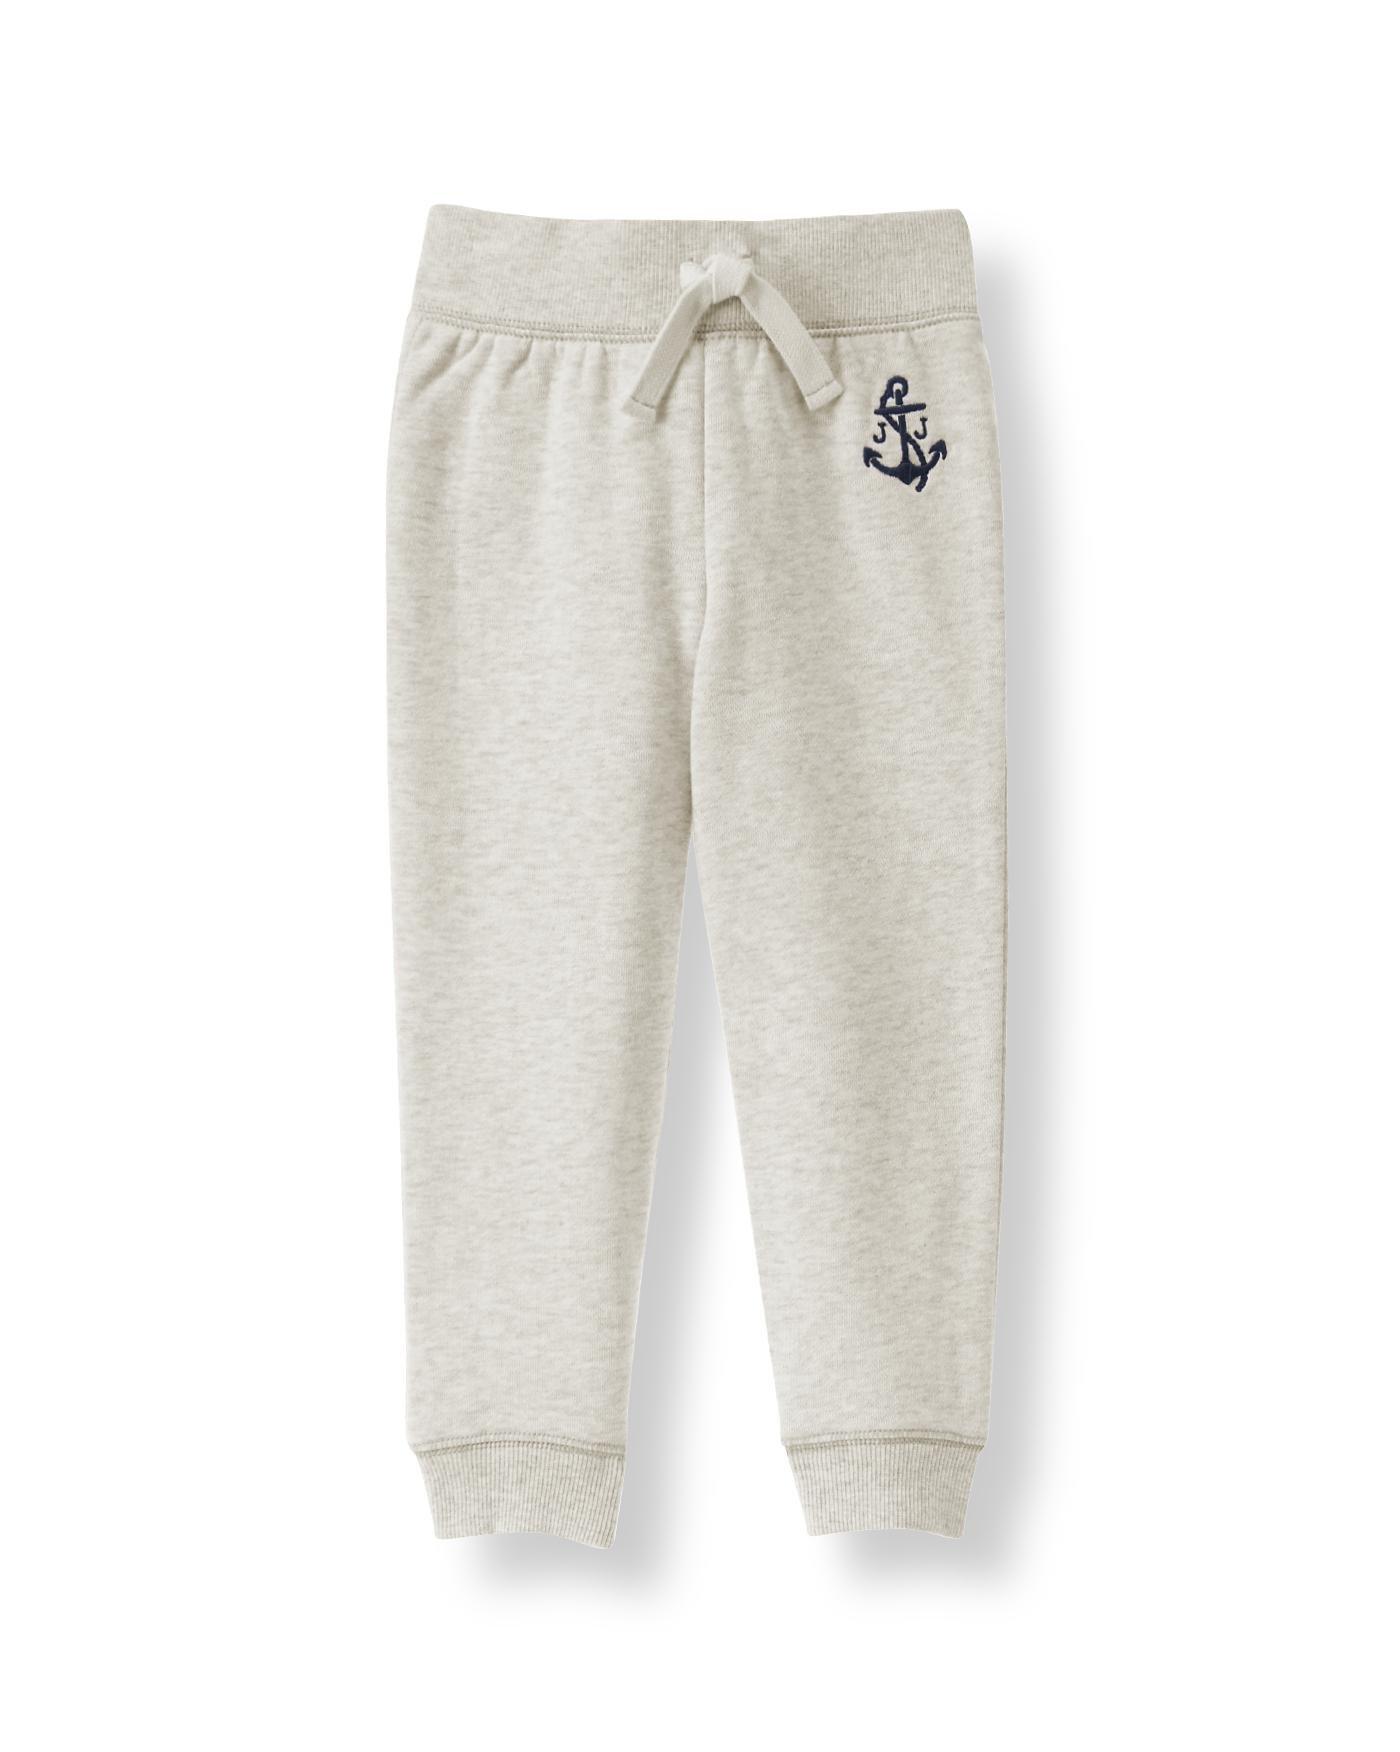 Anchor Fleece Pant image number 0